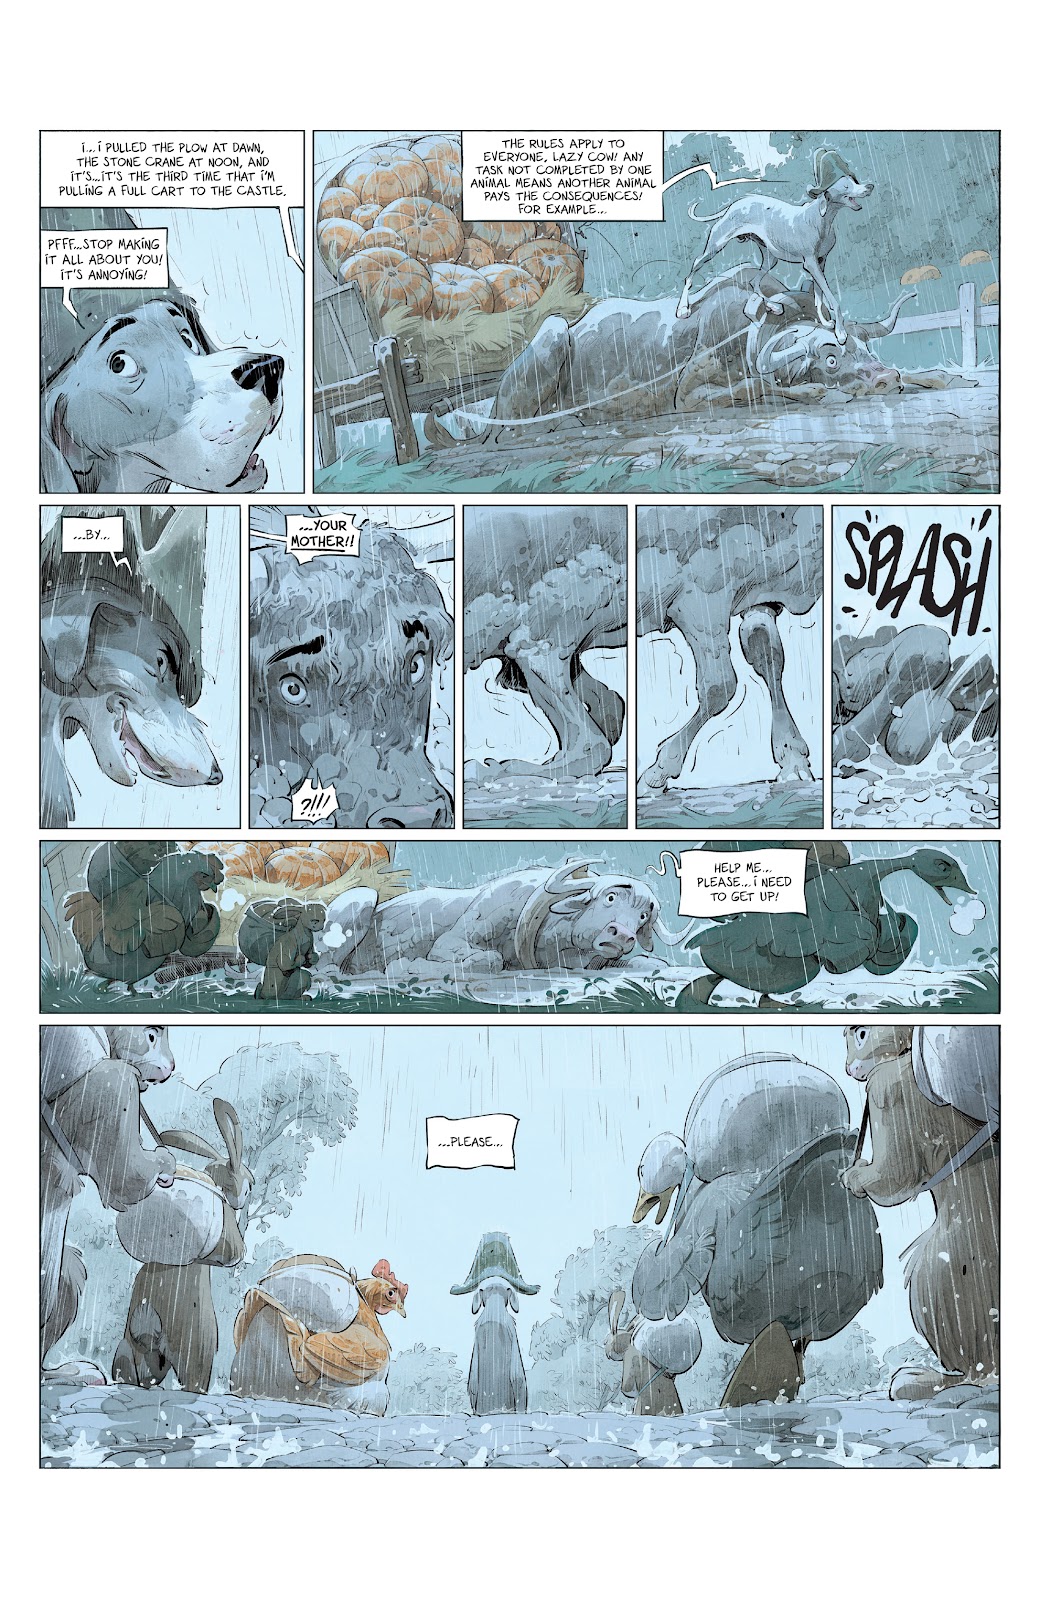 Animal Castle Vol. 2 issue 1 - Page 5